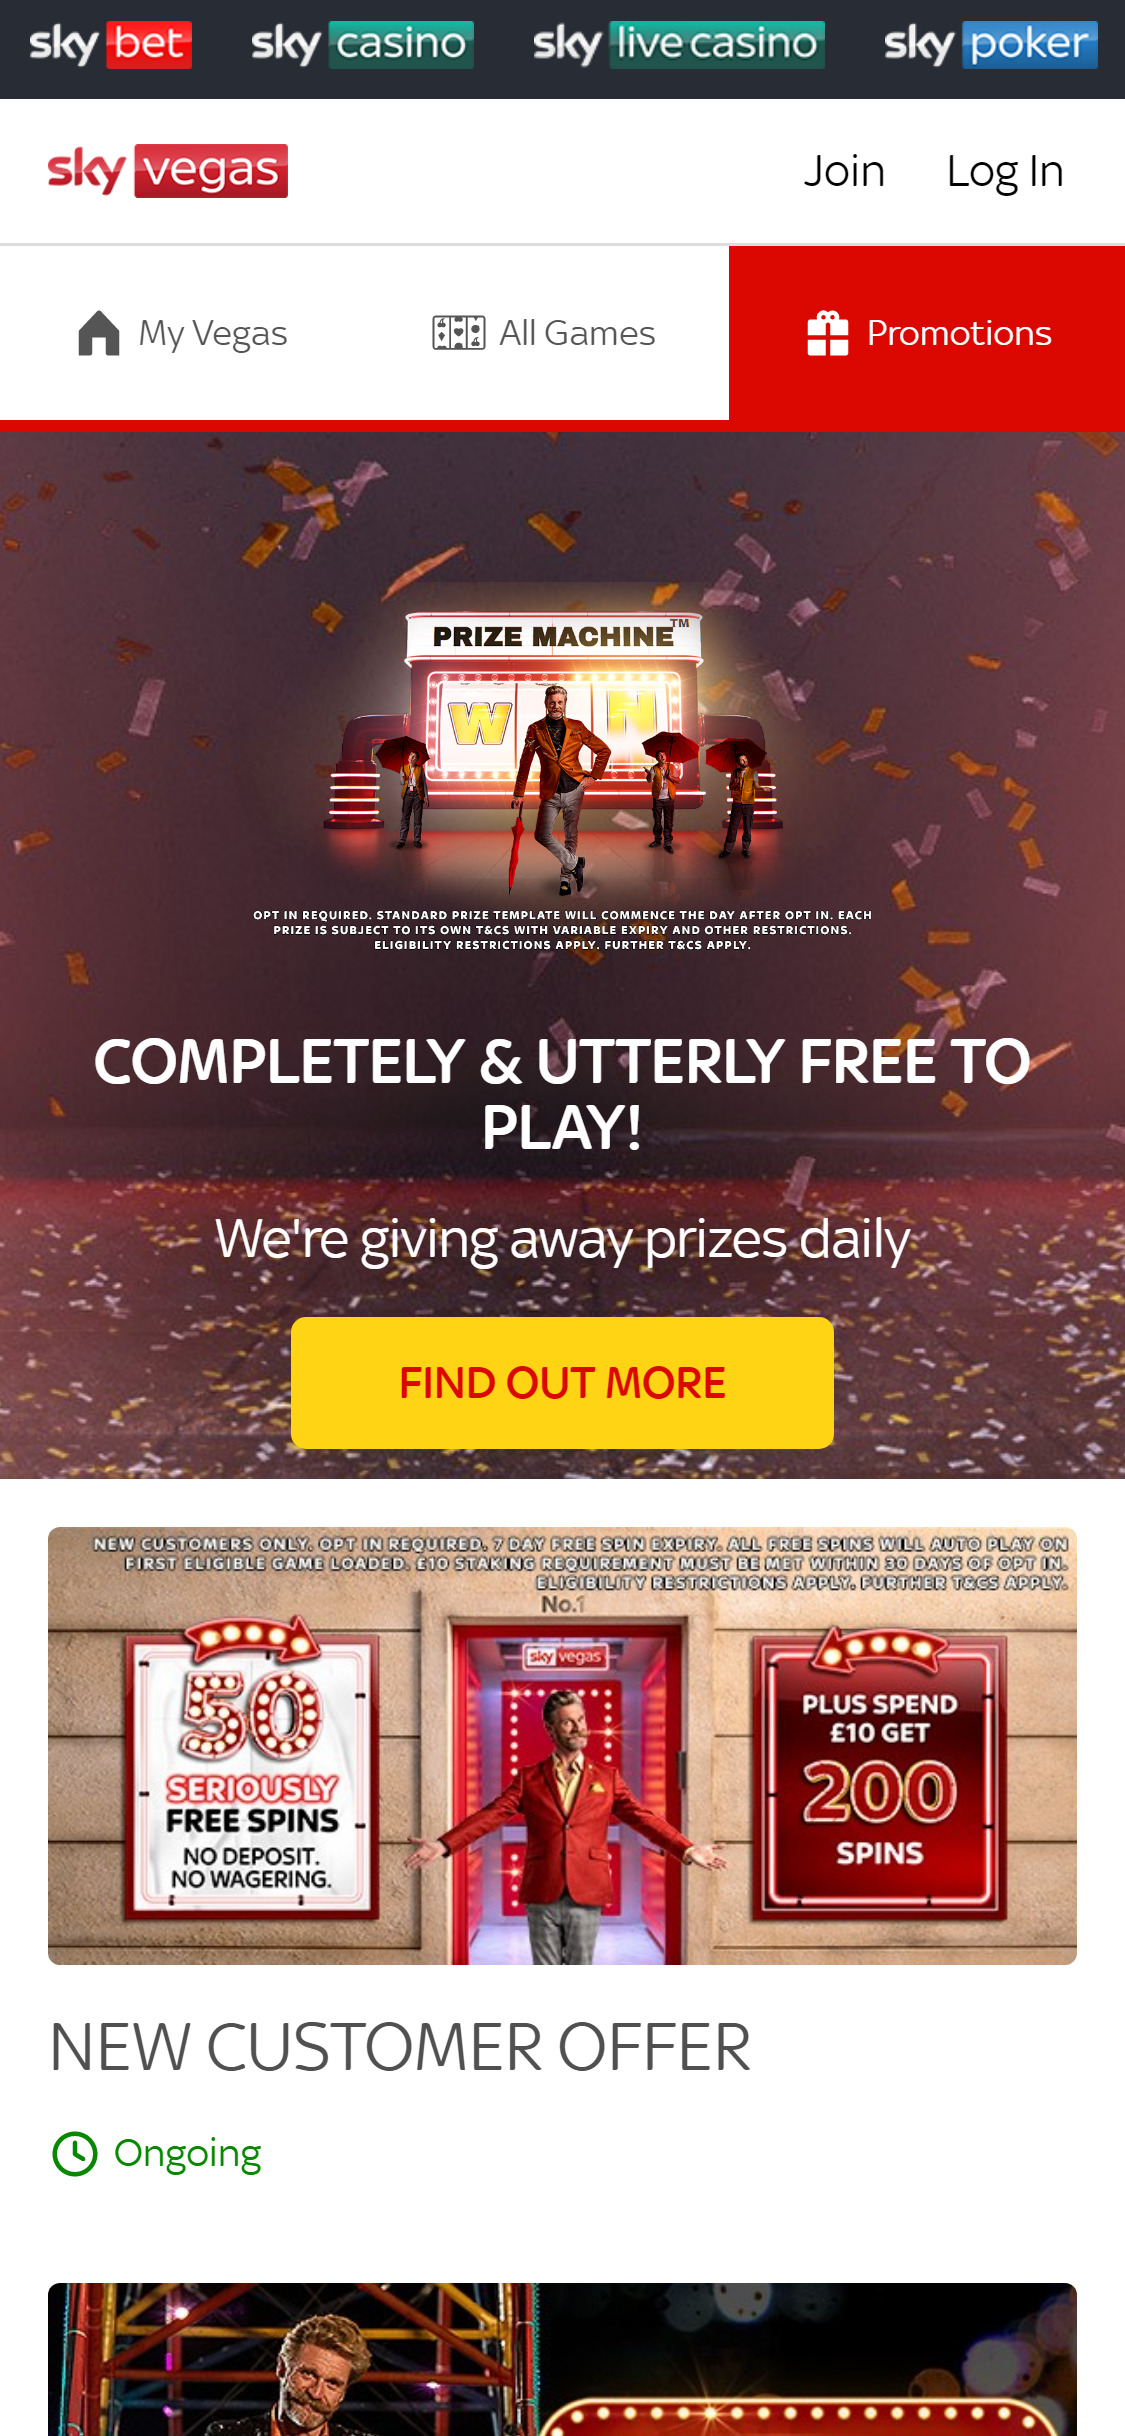 How To Make Your Product Stand Out With skyvegascasinoonline.co.uk